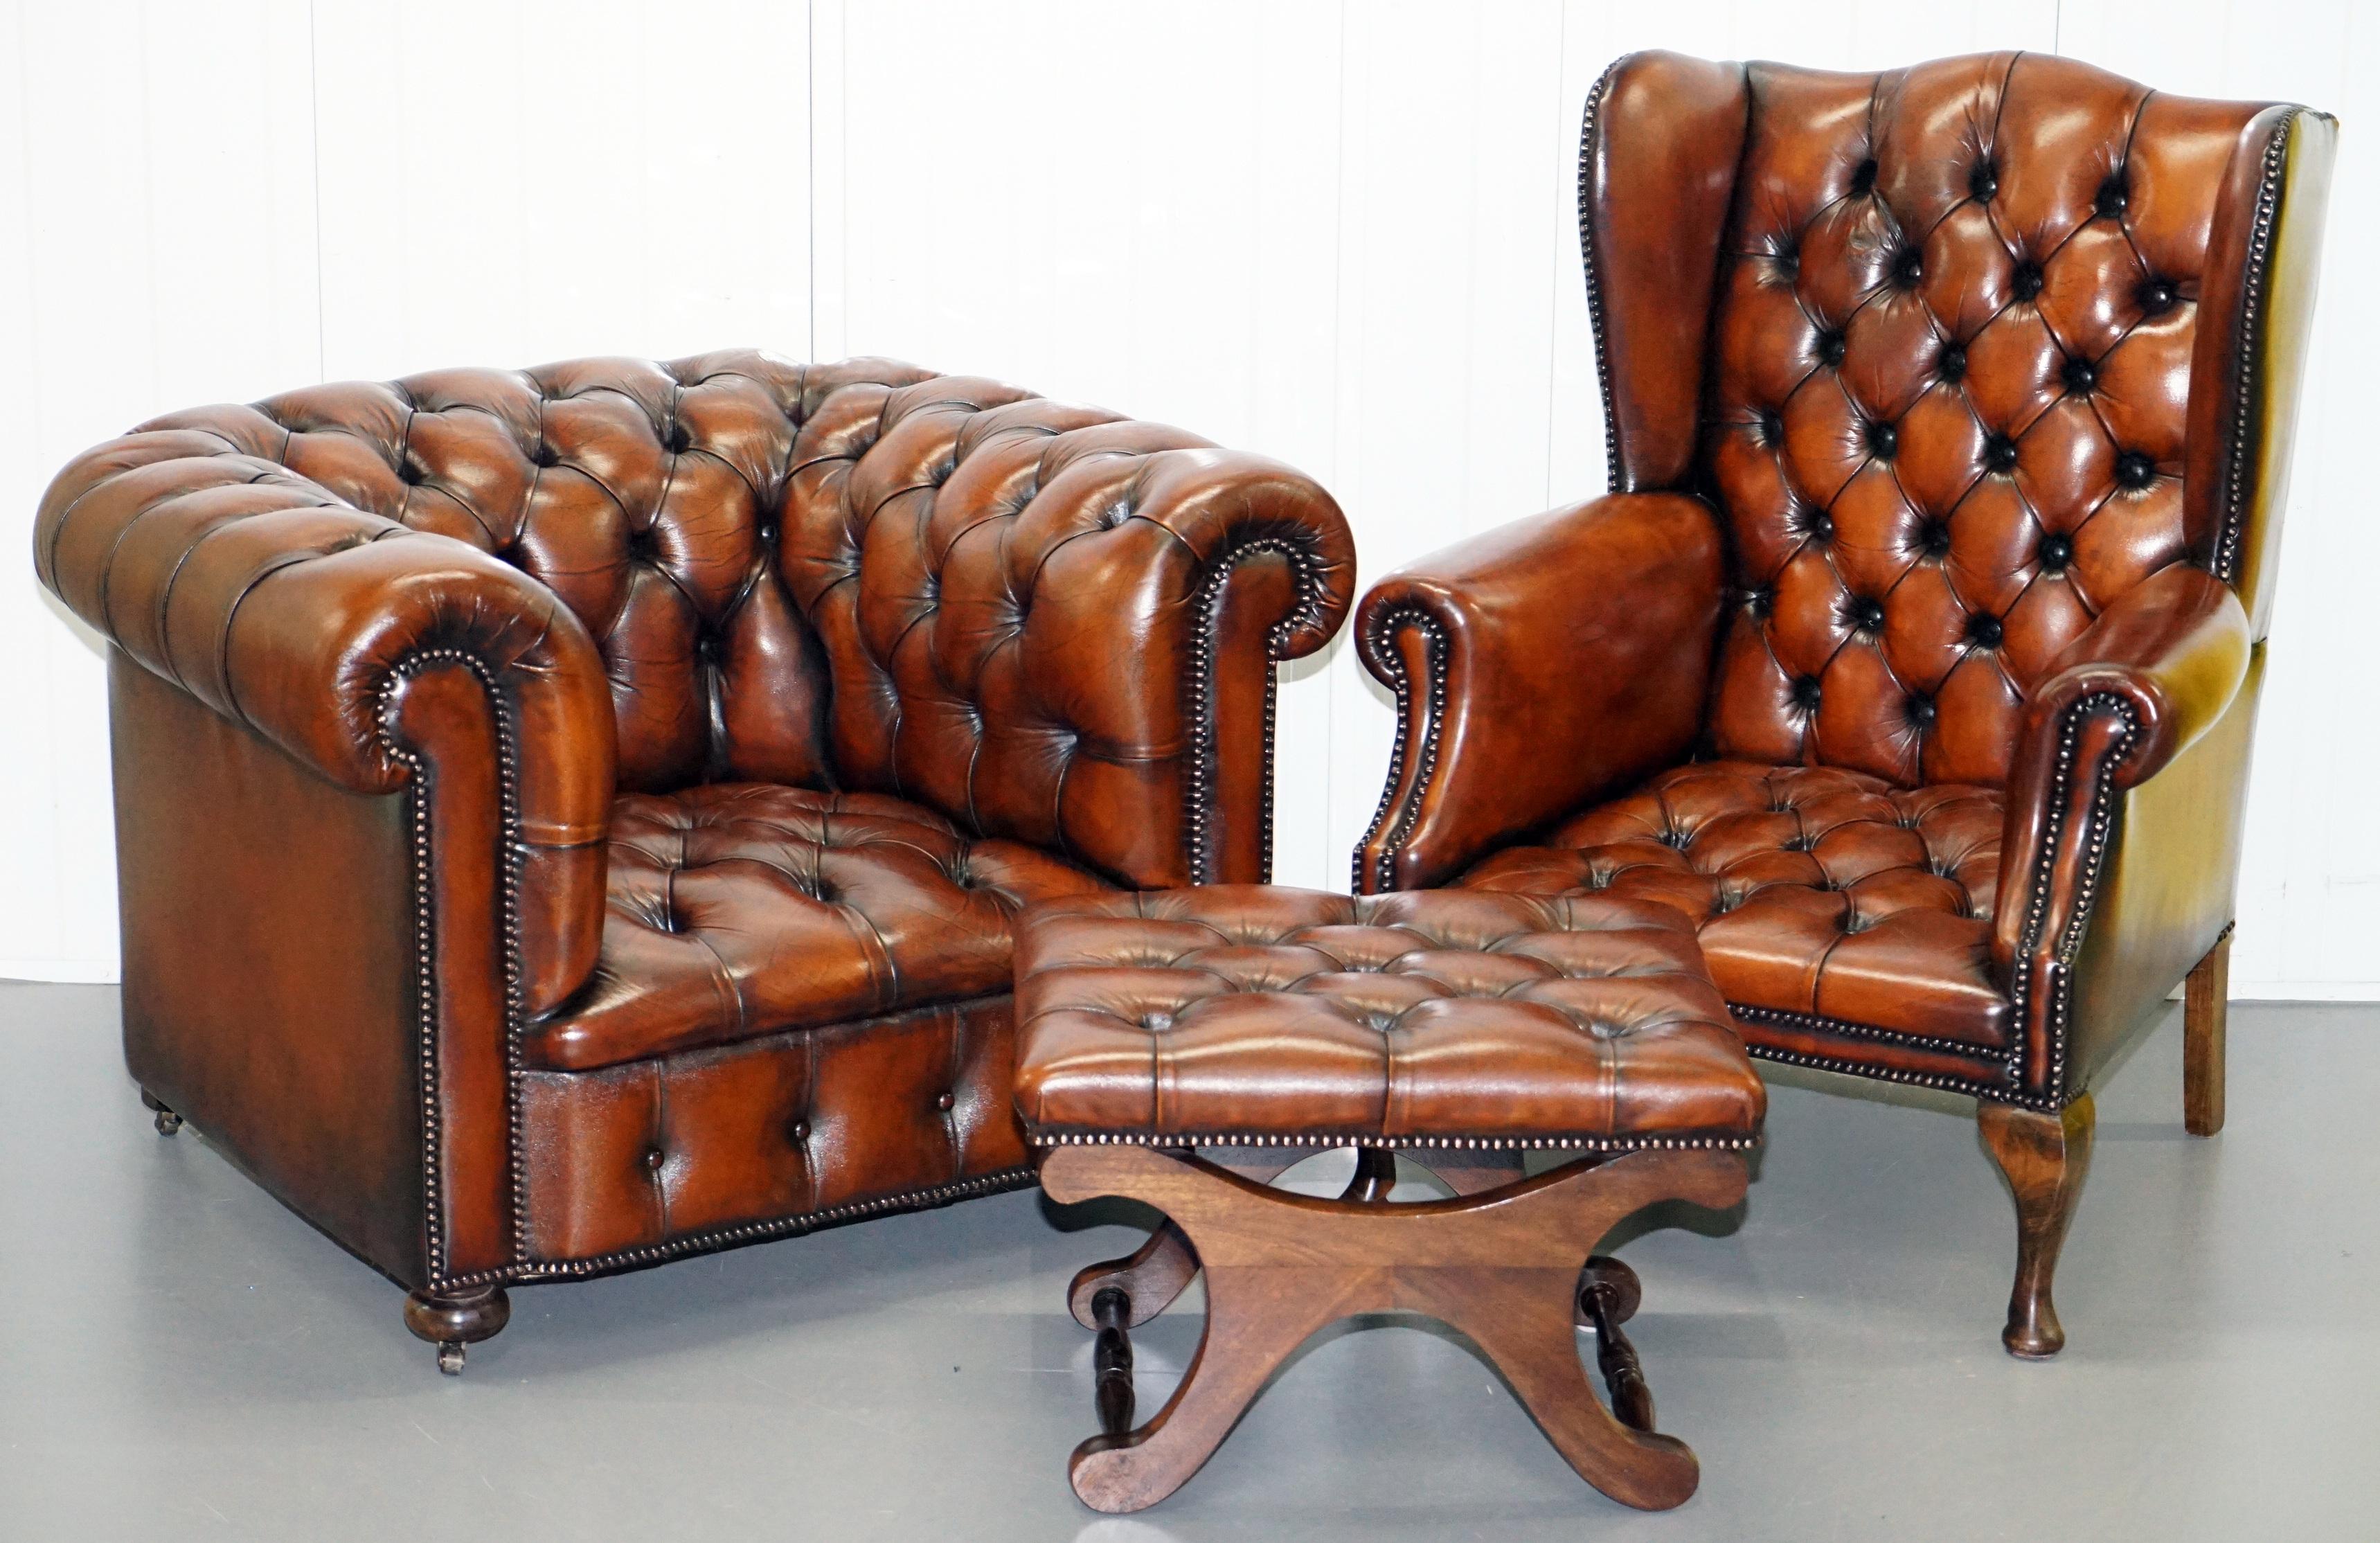 We are delighted to this stunning vintage fully restored Chesterfield cigar brown leather library suite

A very rare find, I never come across original sets of four pieces from this era and especially not the fully buttoned sets. We have fully